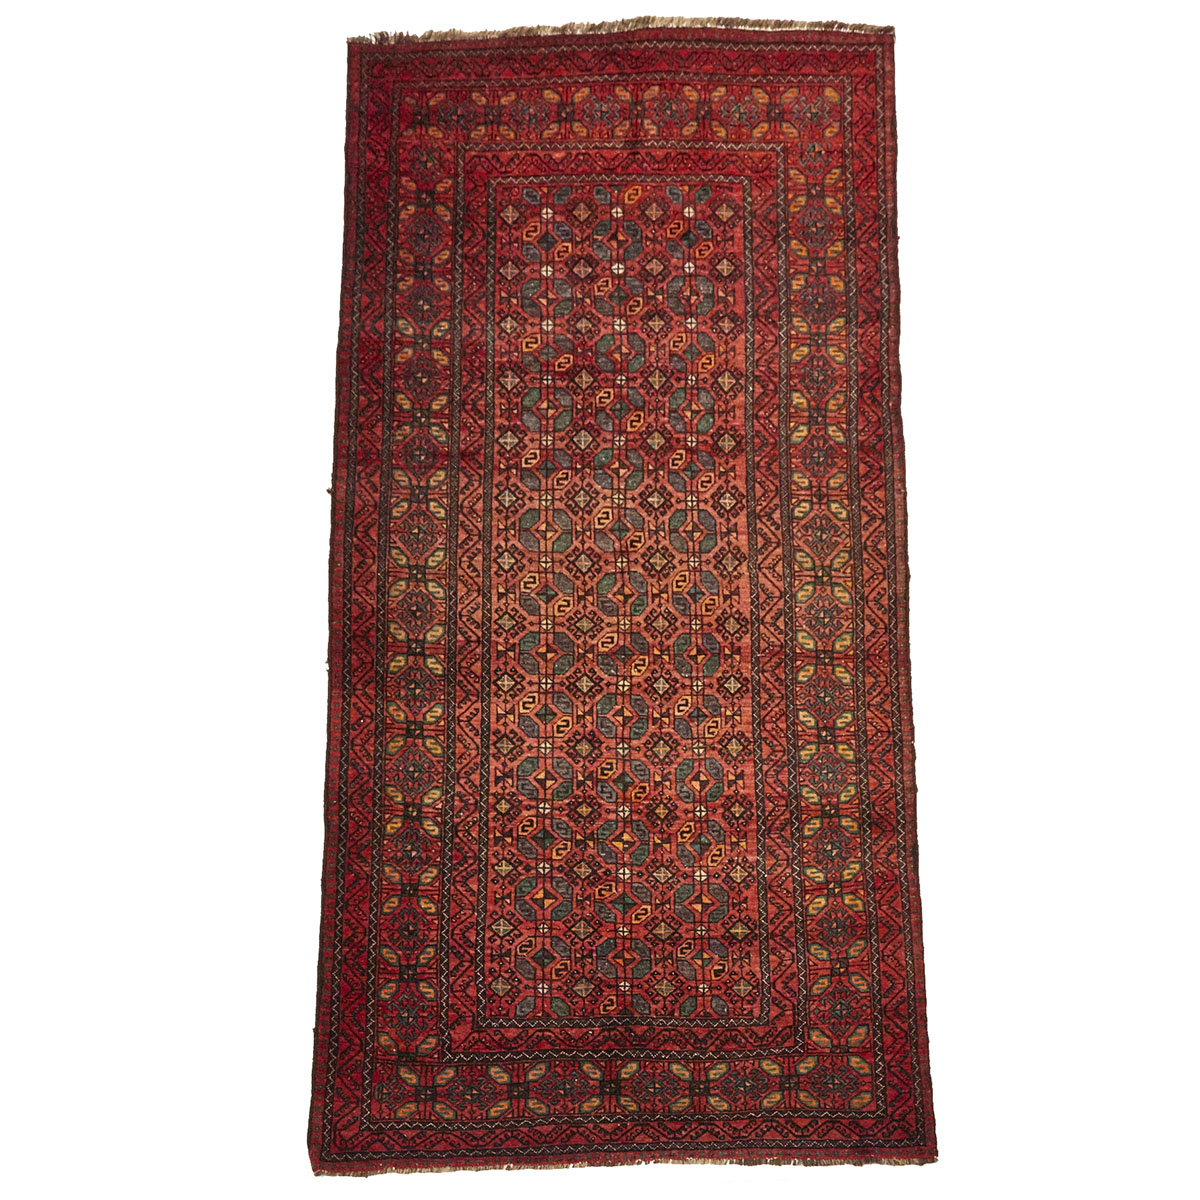 East Persian Long Rug, mid 20th century